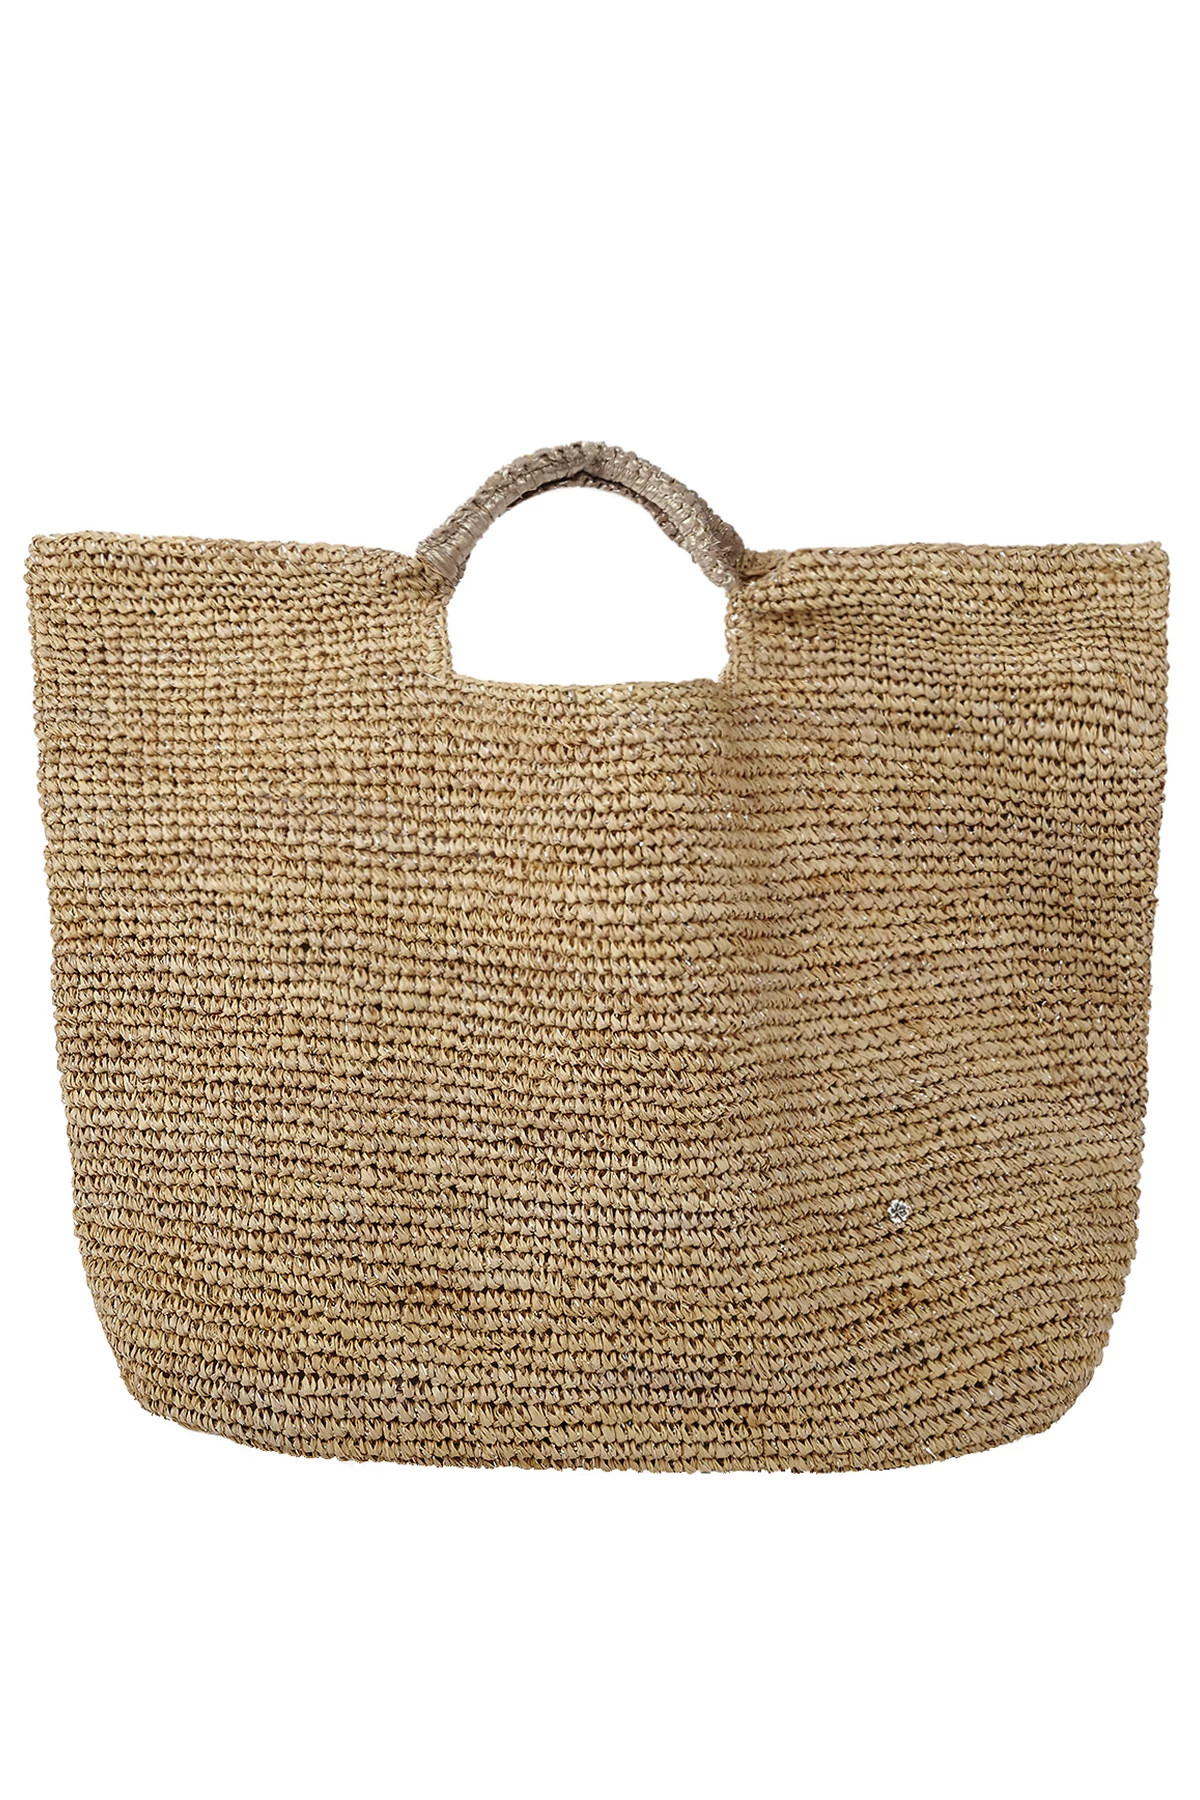 NATURAL/GOLD Napa Lux Tote image number 1